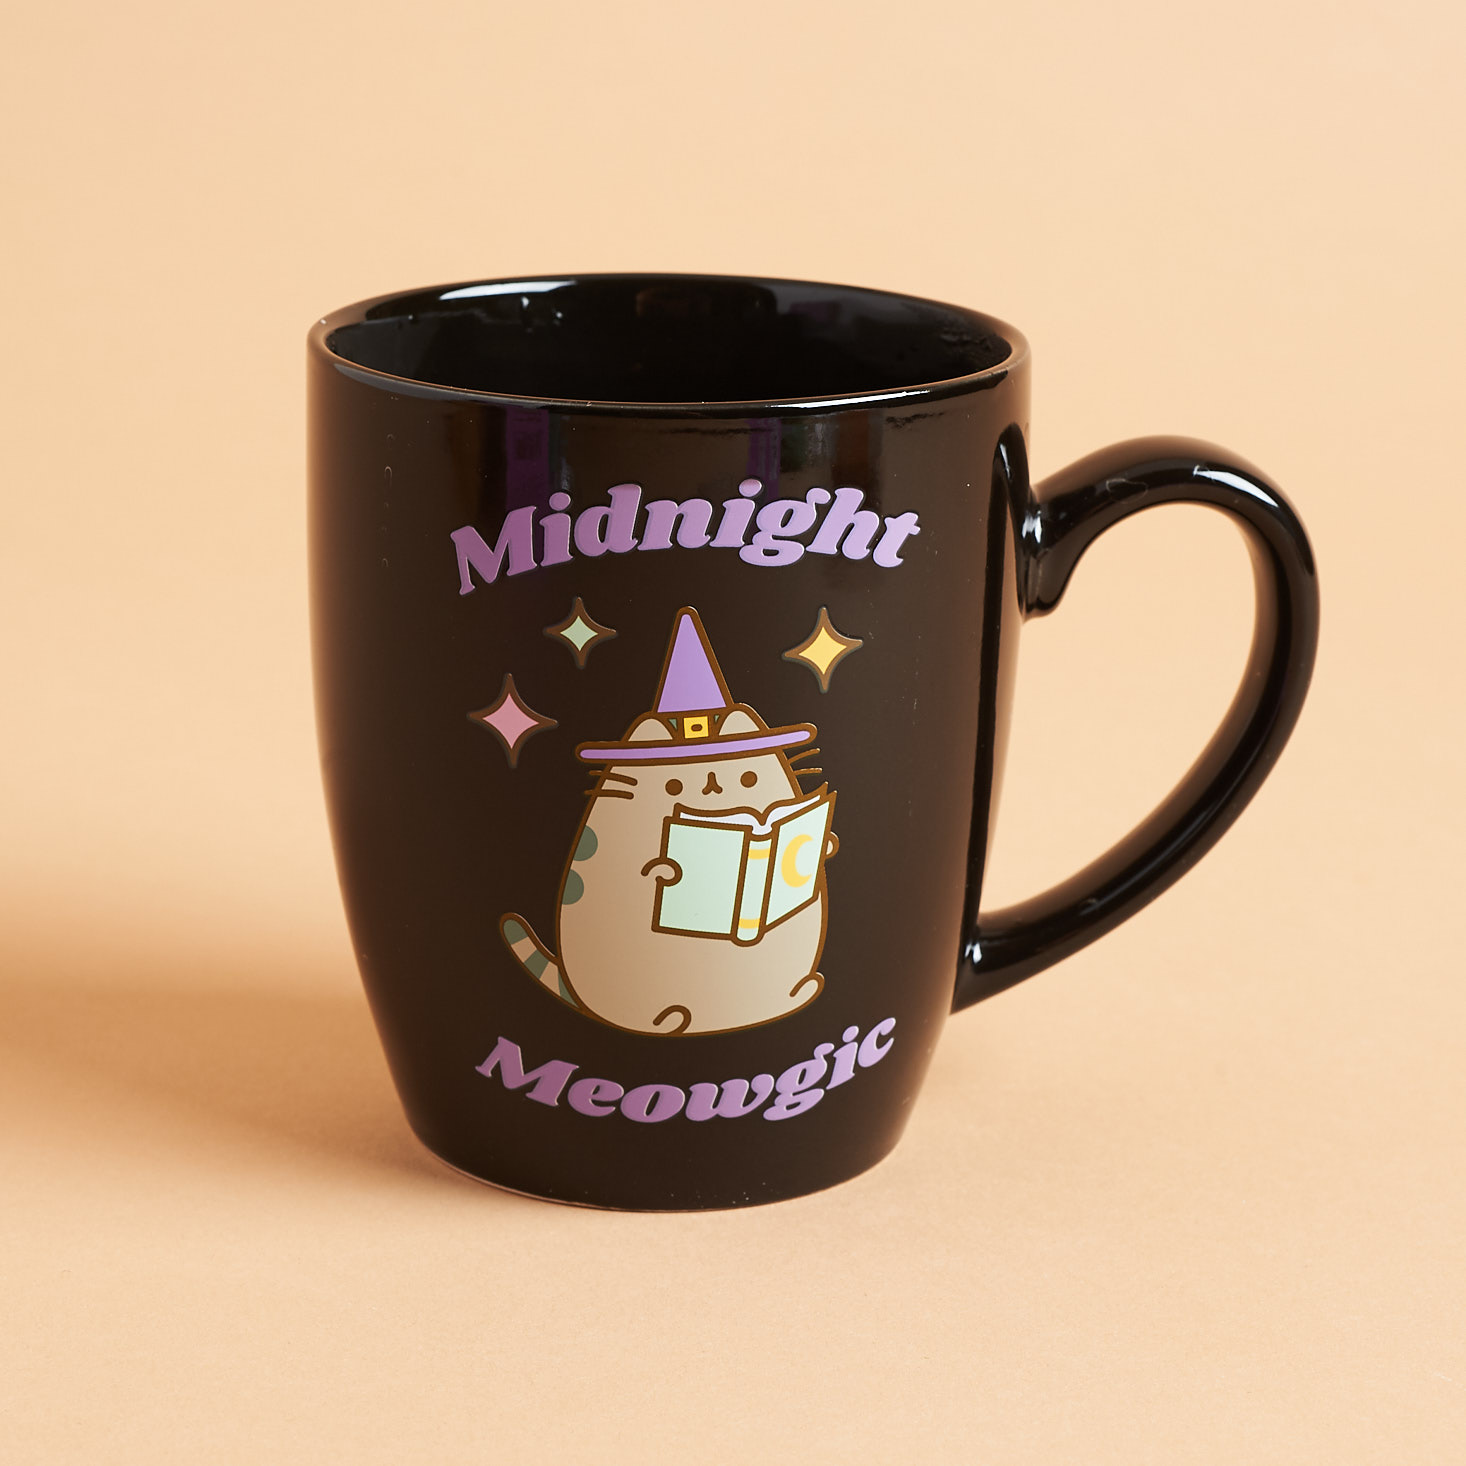 Pusheen color changing mug with "midnight meowgic" now visible